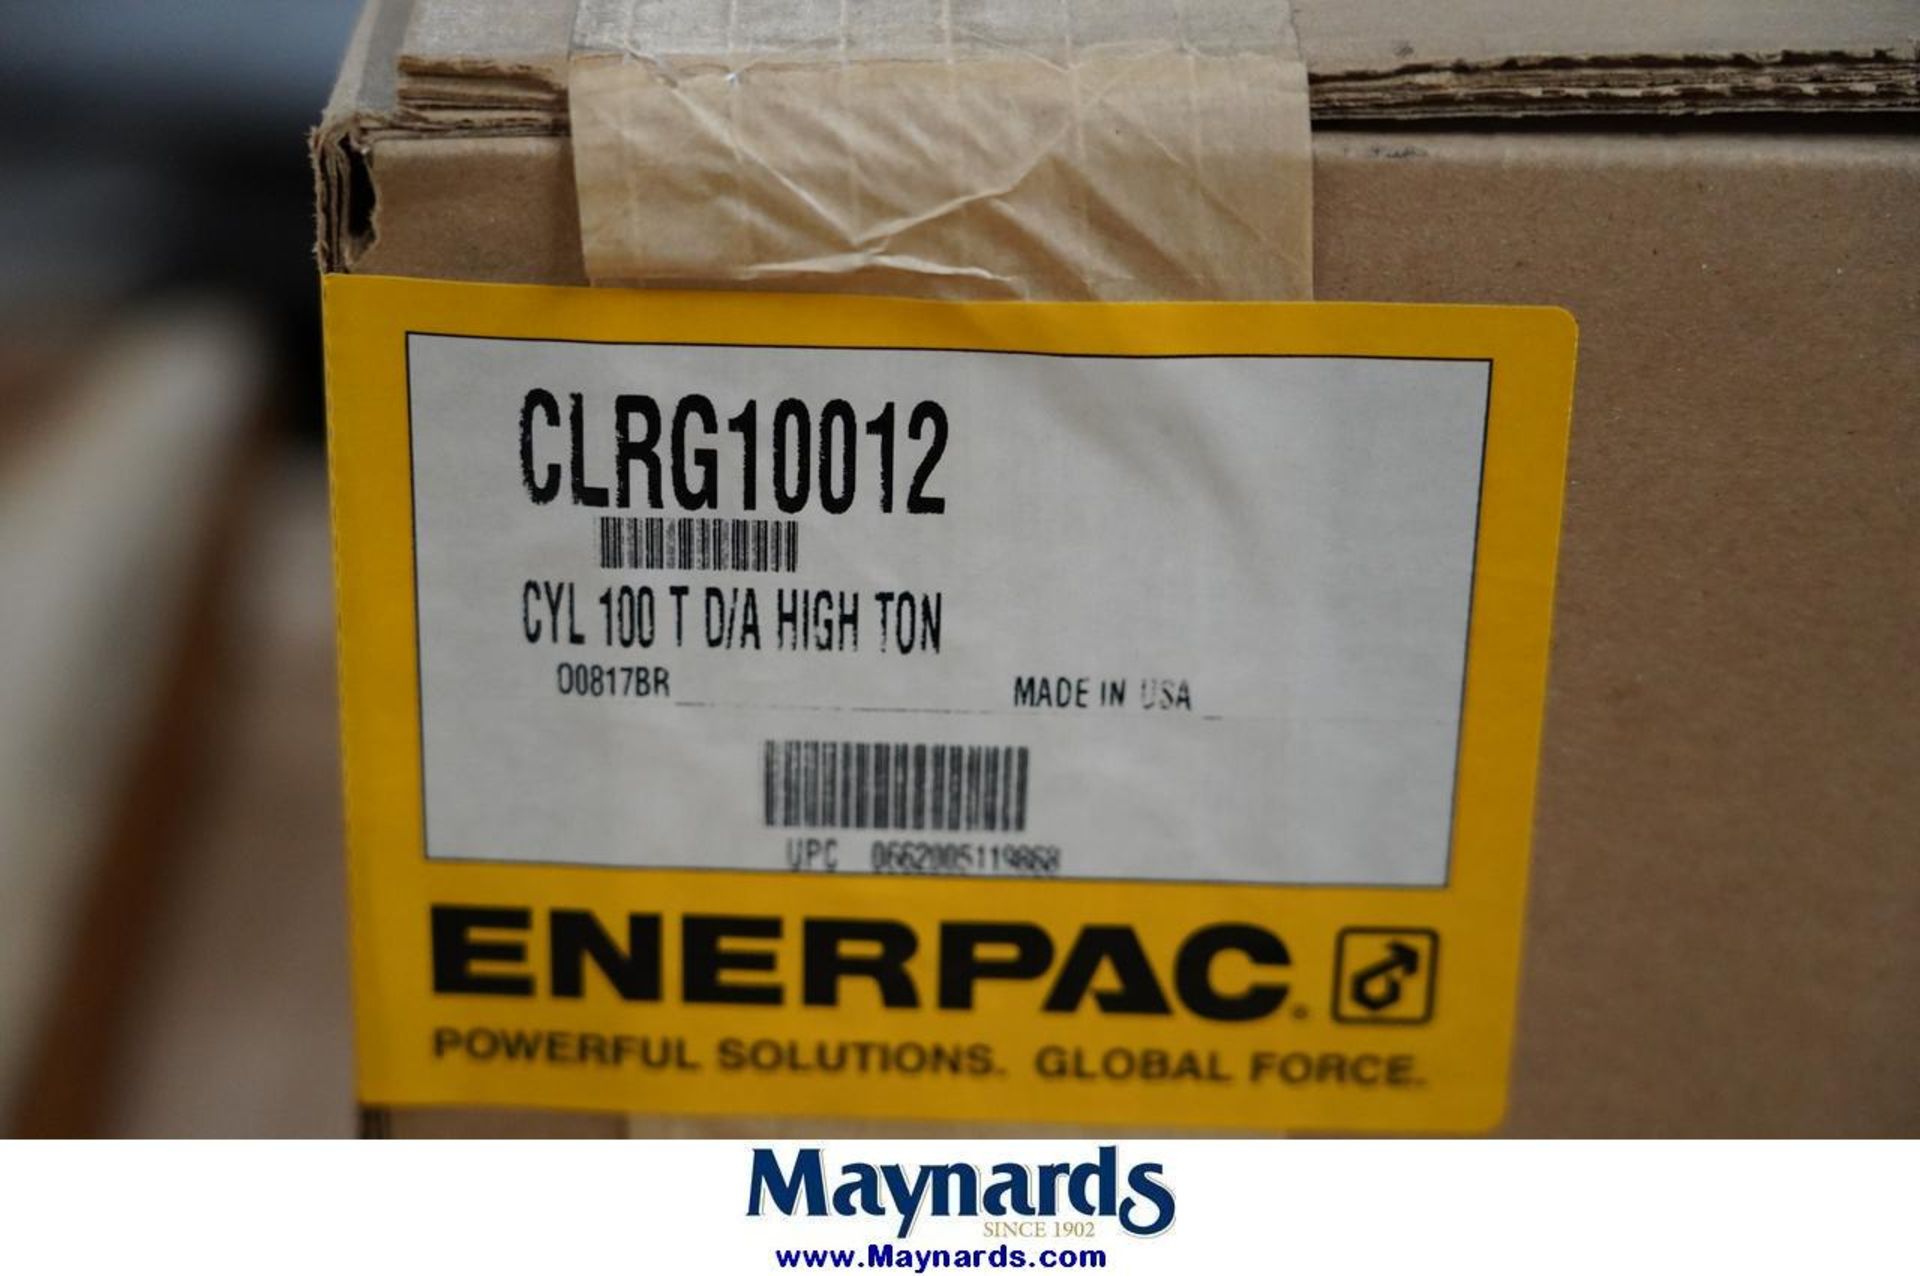 Enerpac CLRG10012 100 Ton Hydraulic Cylinder - Double Acting - High Tonnage - Image 4 of 4